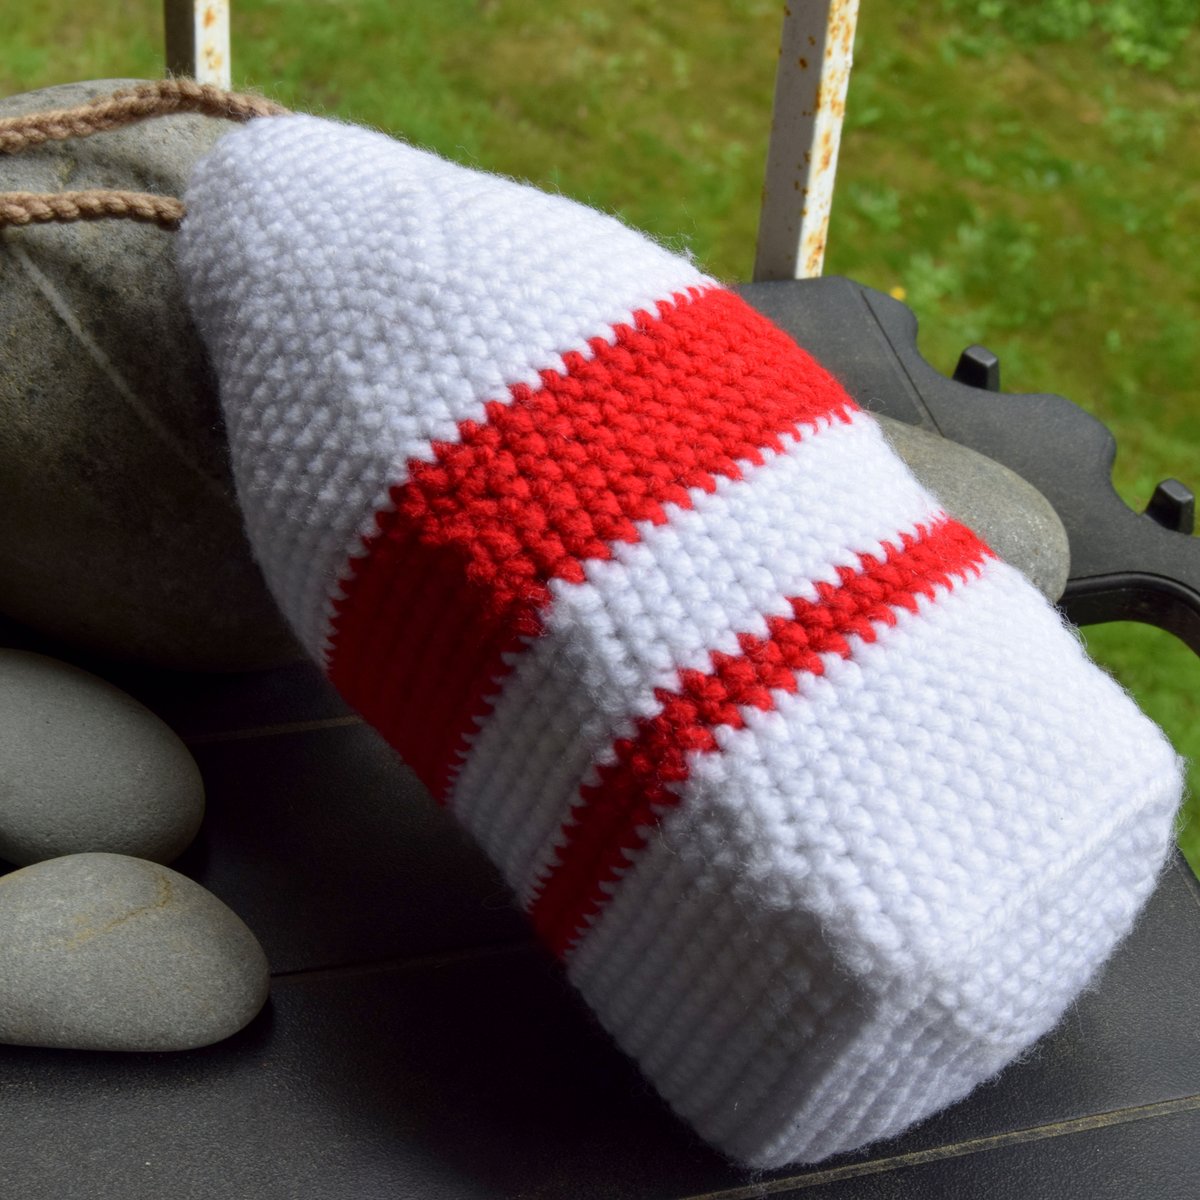 Crochet Lobster Buoy pattern! Easy to make, and beach-y fun!
madebyjody666.myshopify.com/products/lobst…
#buoy #crochet #crochetpattern #amigurumi #crochetbuoy #summercrochet #summercrafts #funcrafts #canada #novascotia #lobster #handmade